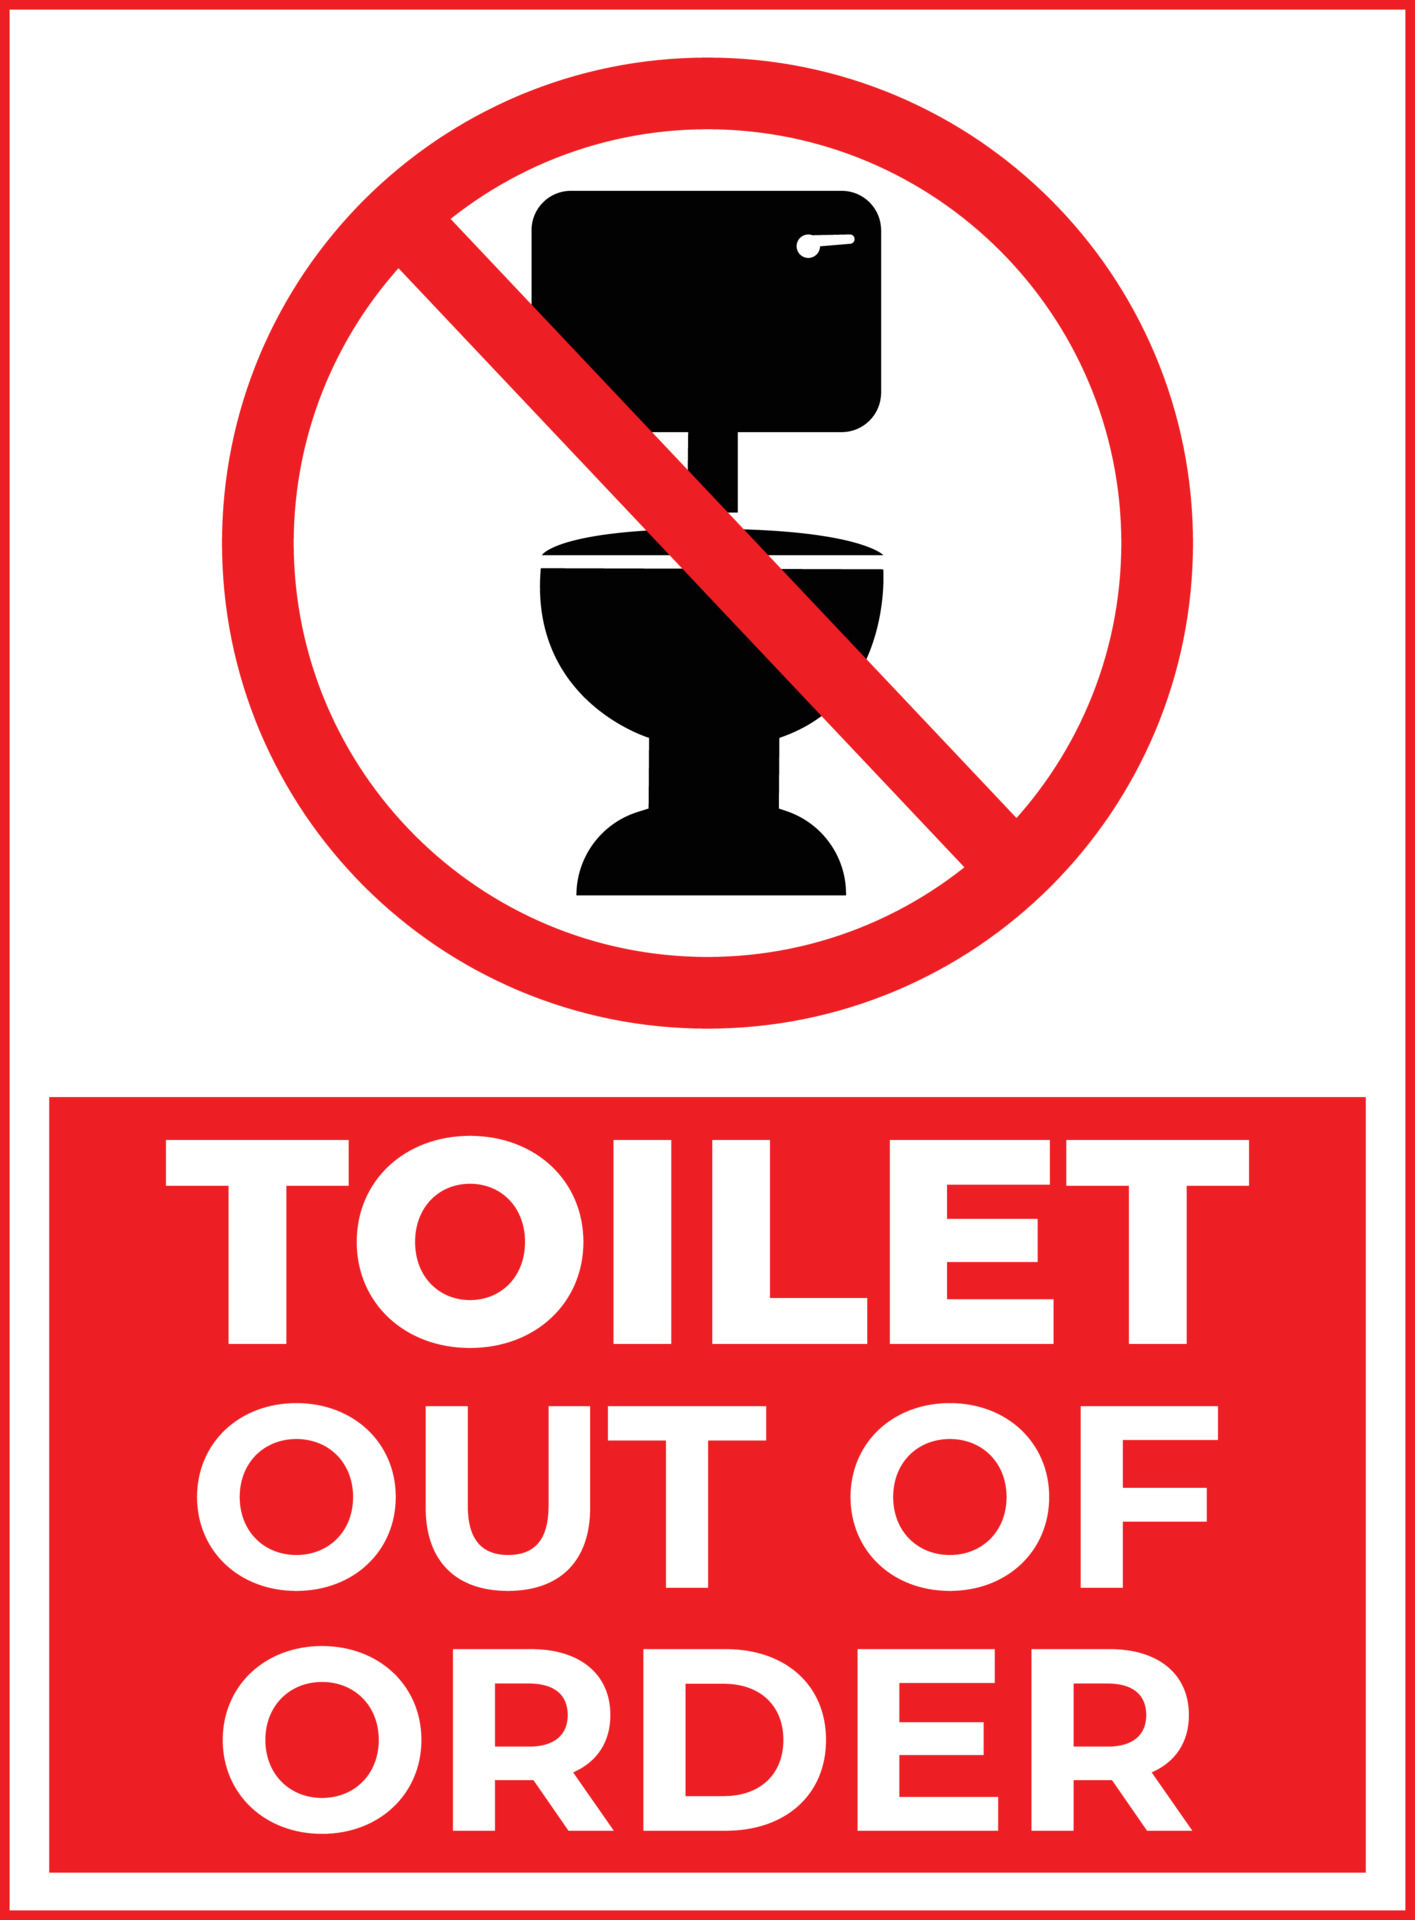 toilet-out-of-order-warning-sign-in-red-and-white-color-7249016-vector